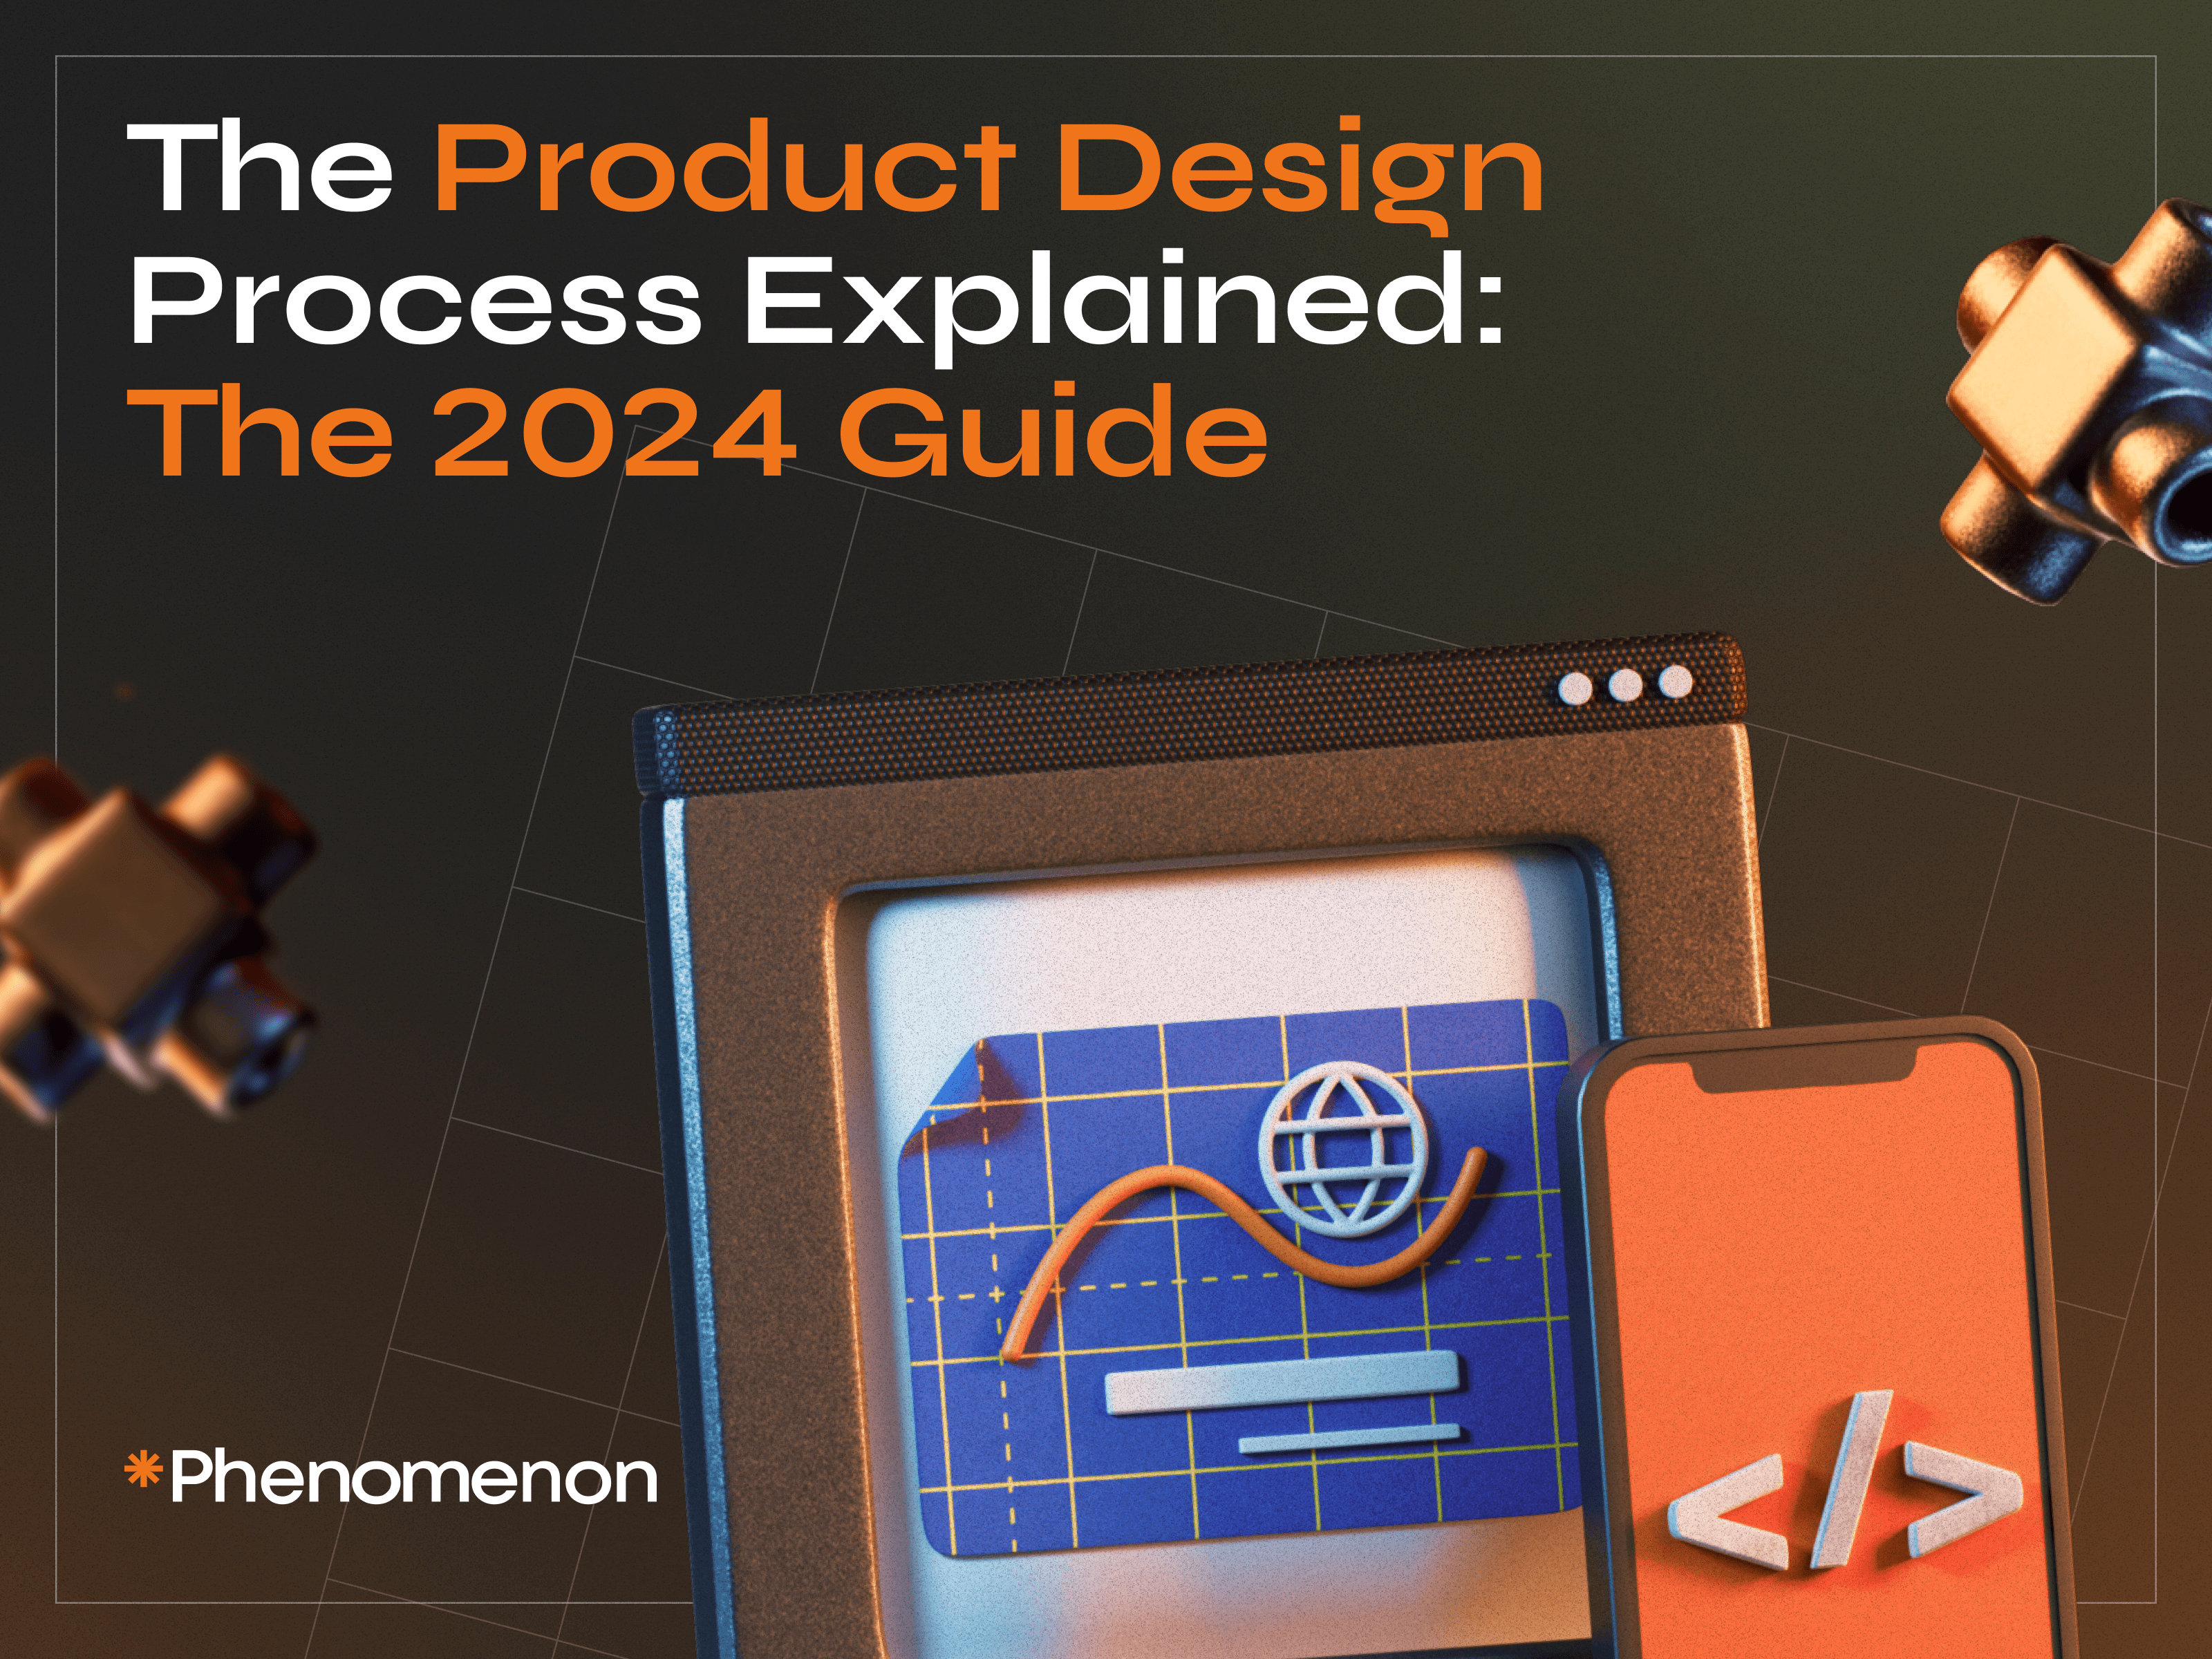 The Product Design Process Explained: The 2024 Guide - Photo 0